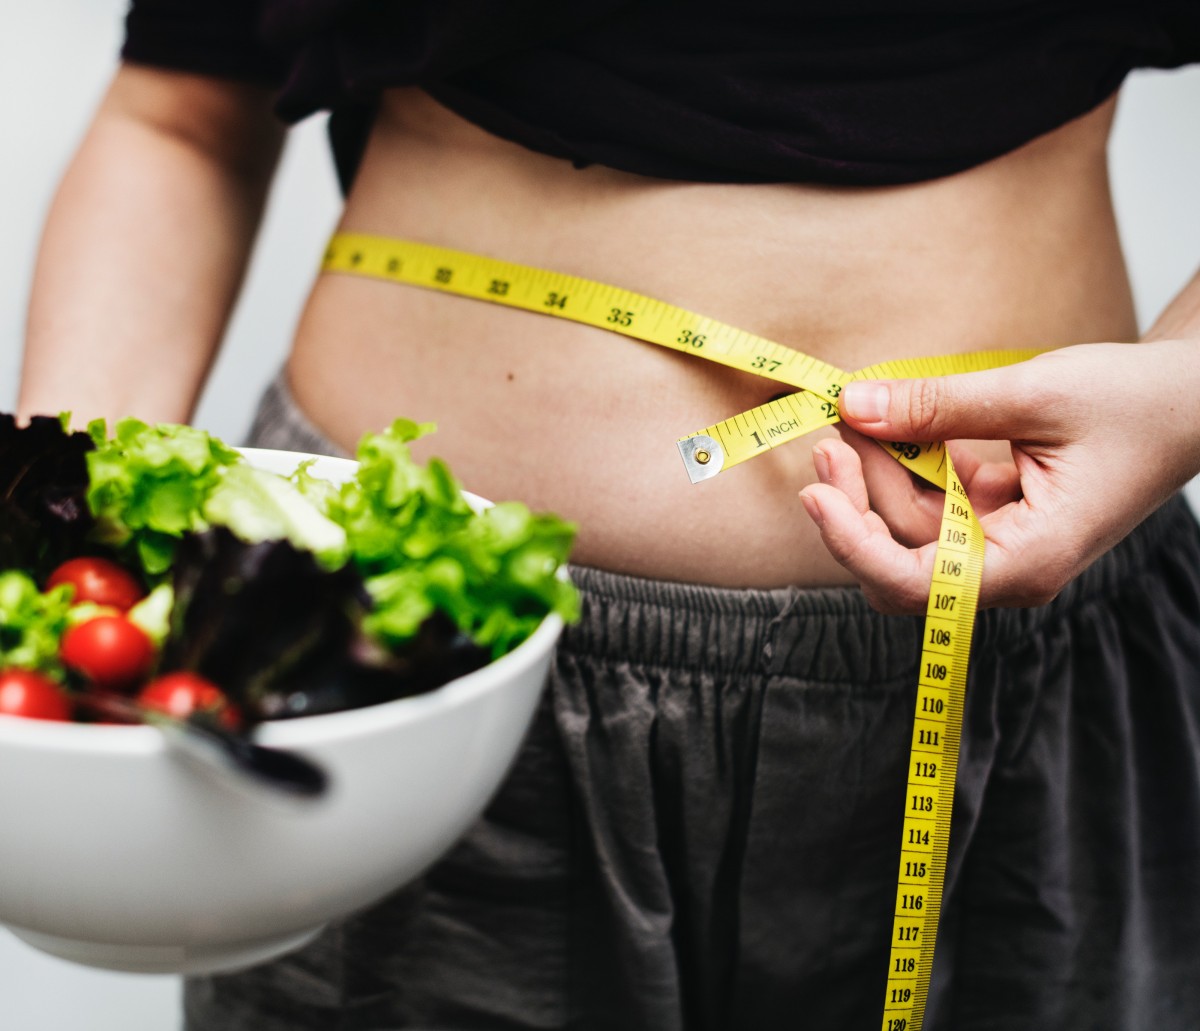 In What Way Is a Weight-Gaining Diet Different From a Weight-Loss Diet?